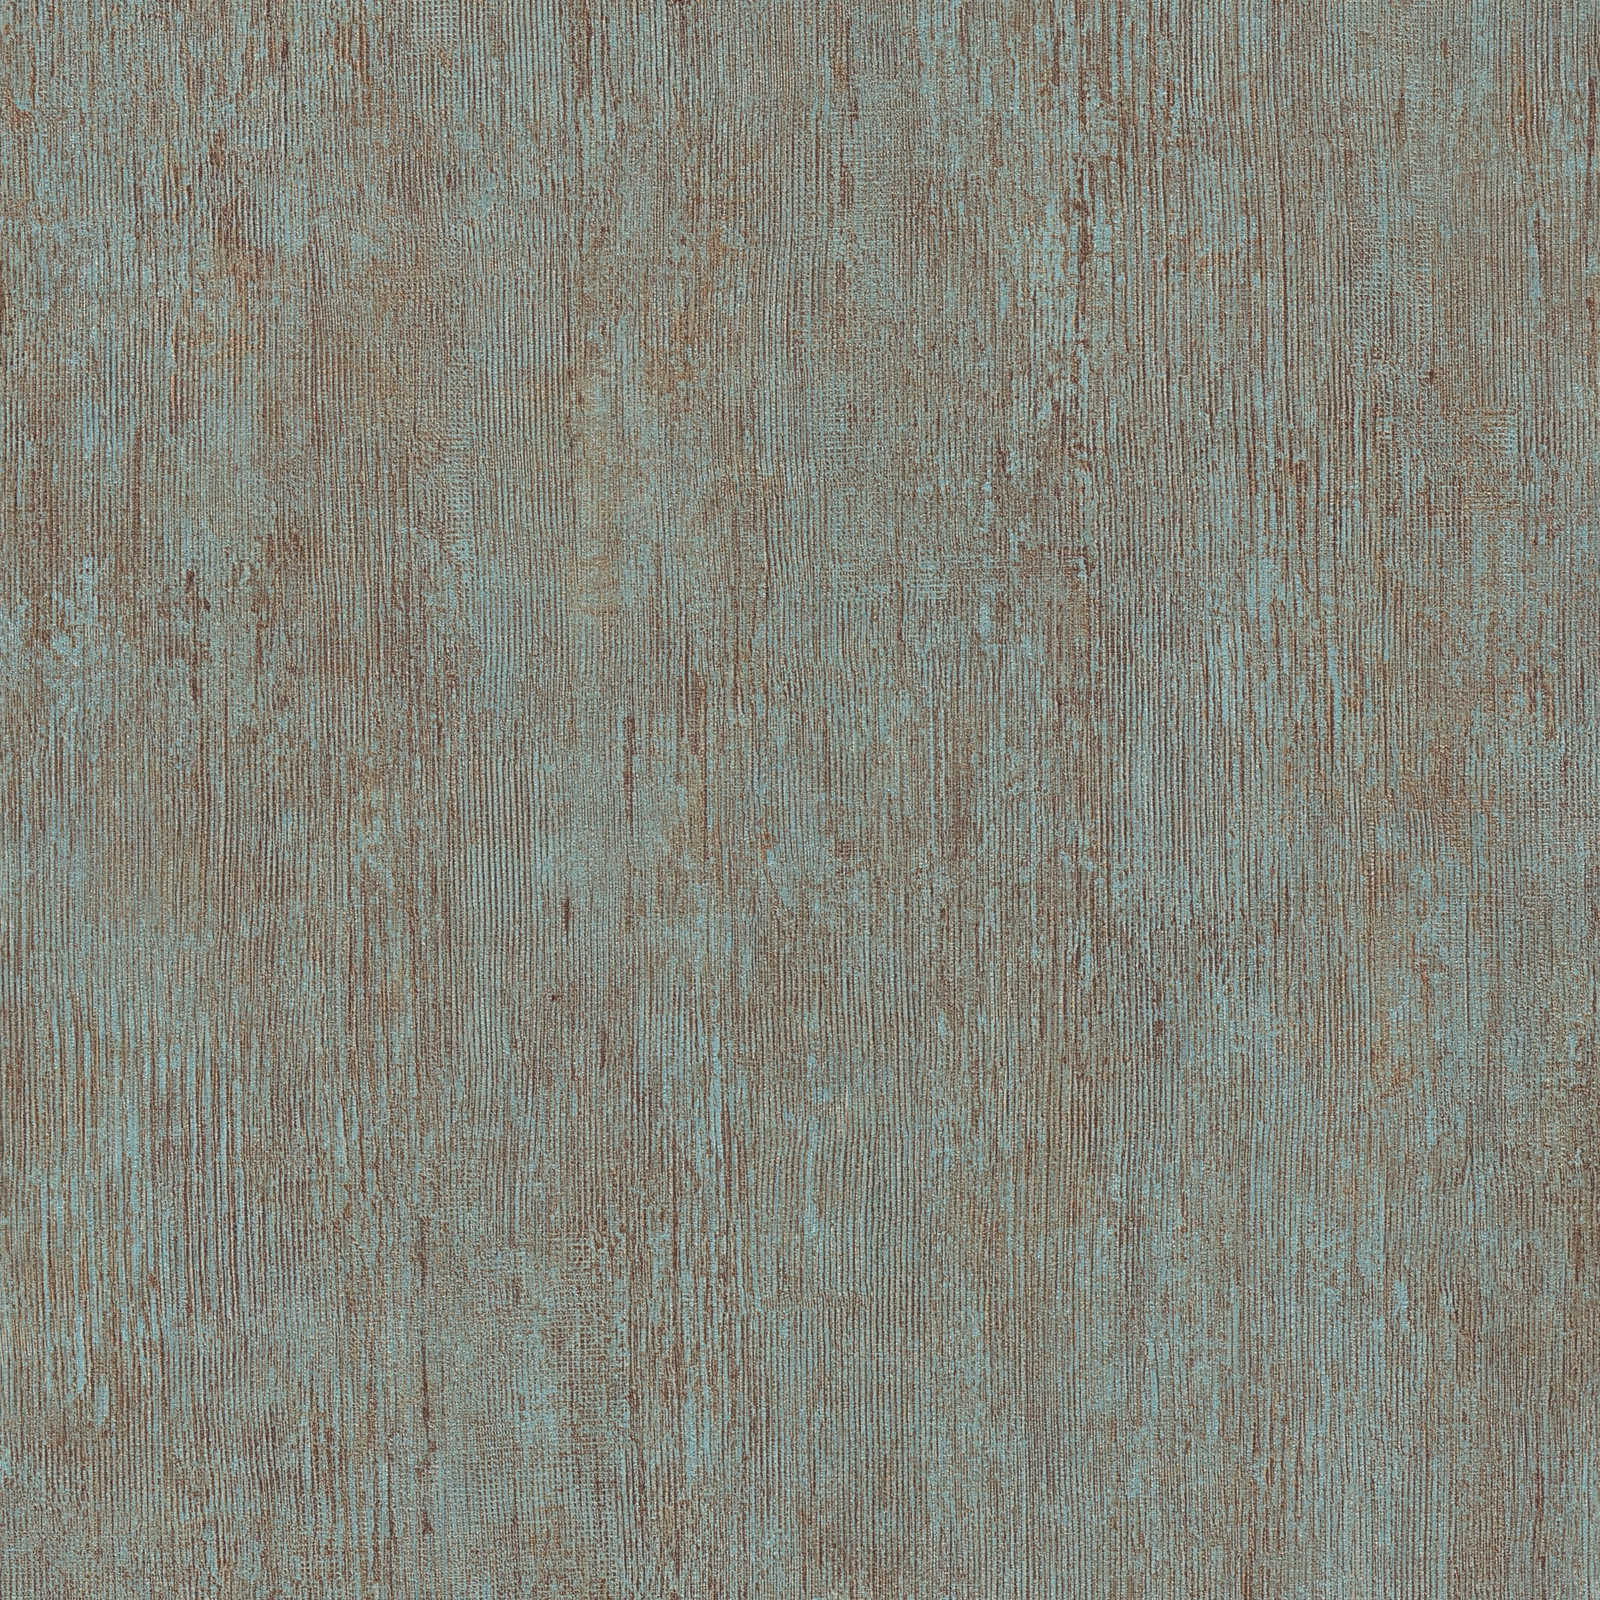 Non-woven wallpaper used look & rust effect - brown, turquoise
